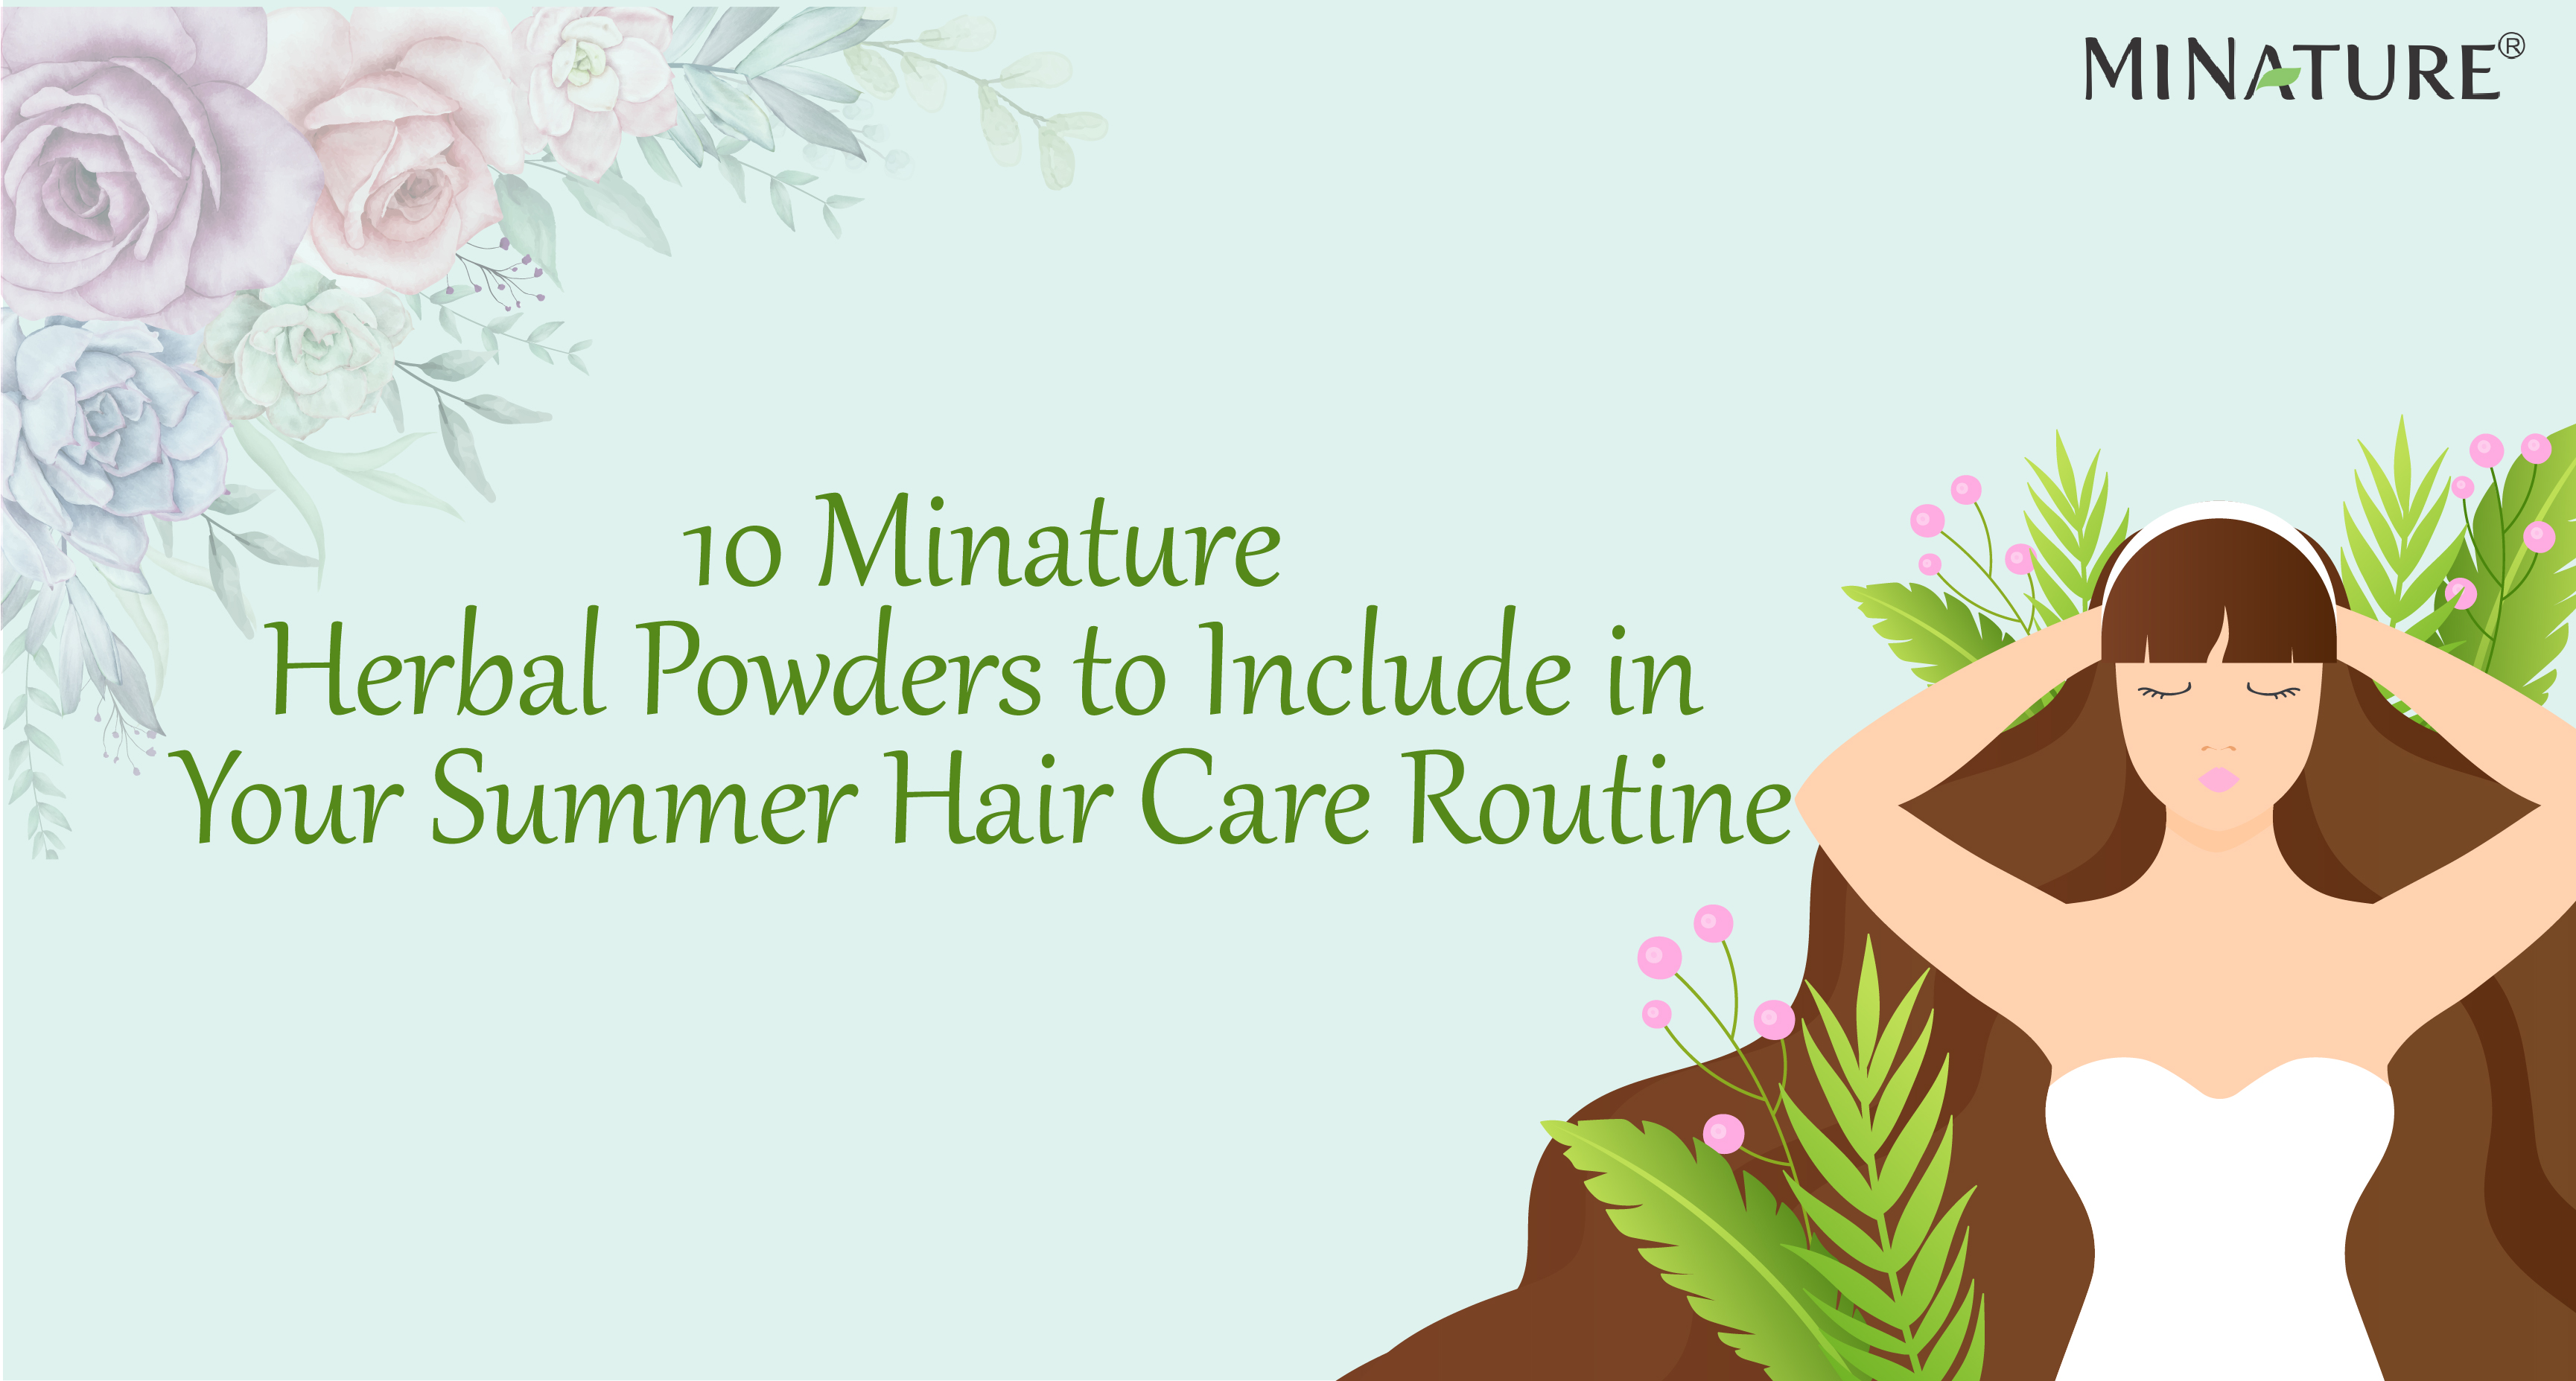 10 MINATURE Herbal Powders to include in your summer Hair Care Routine